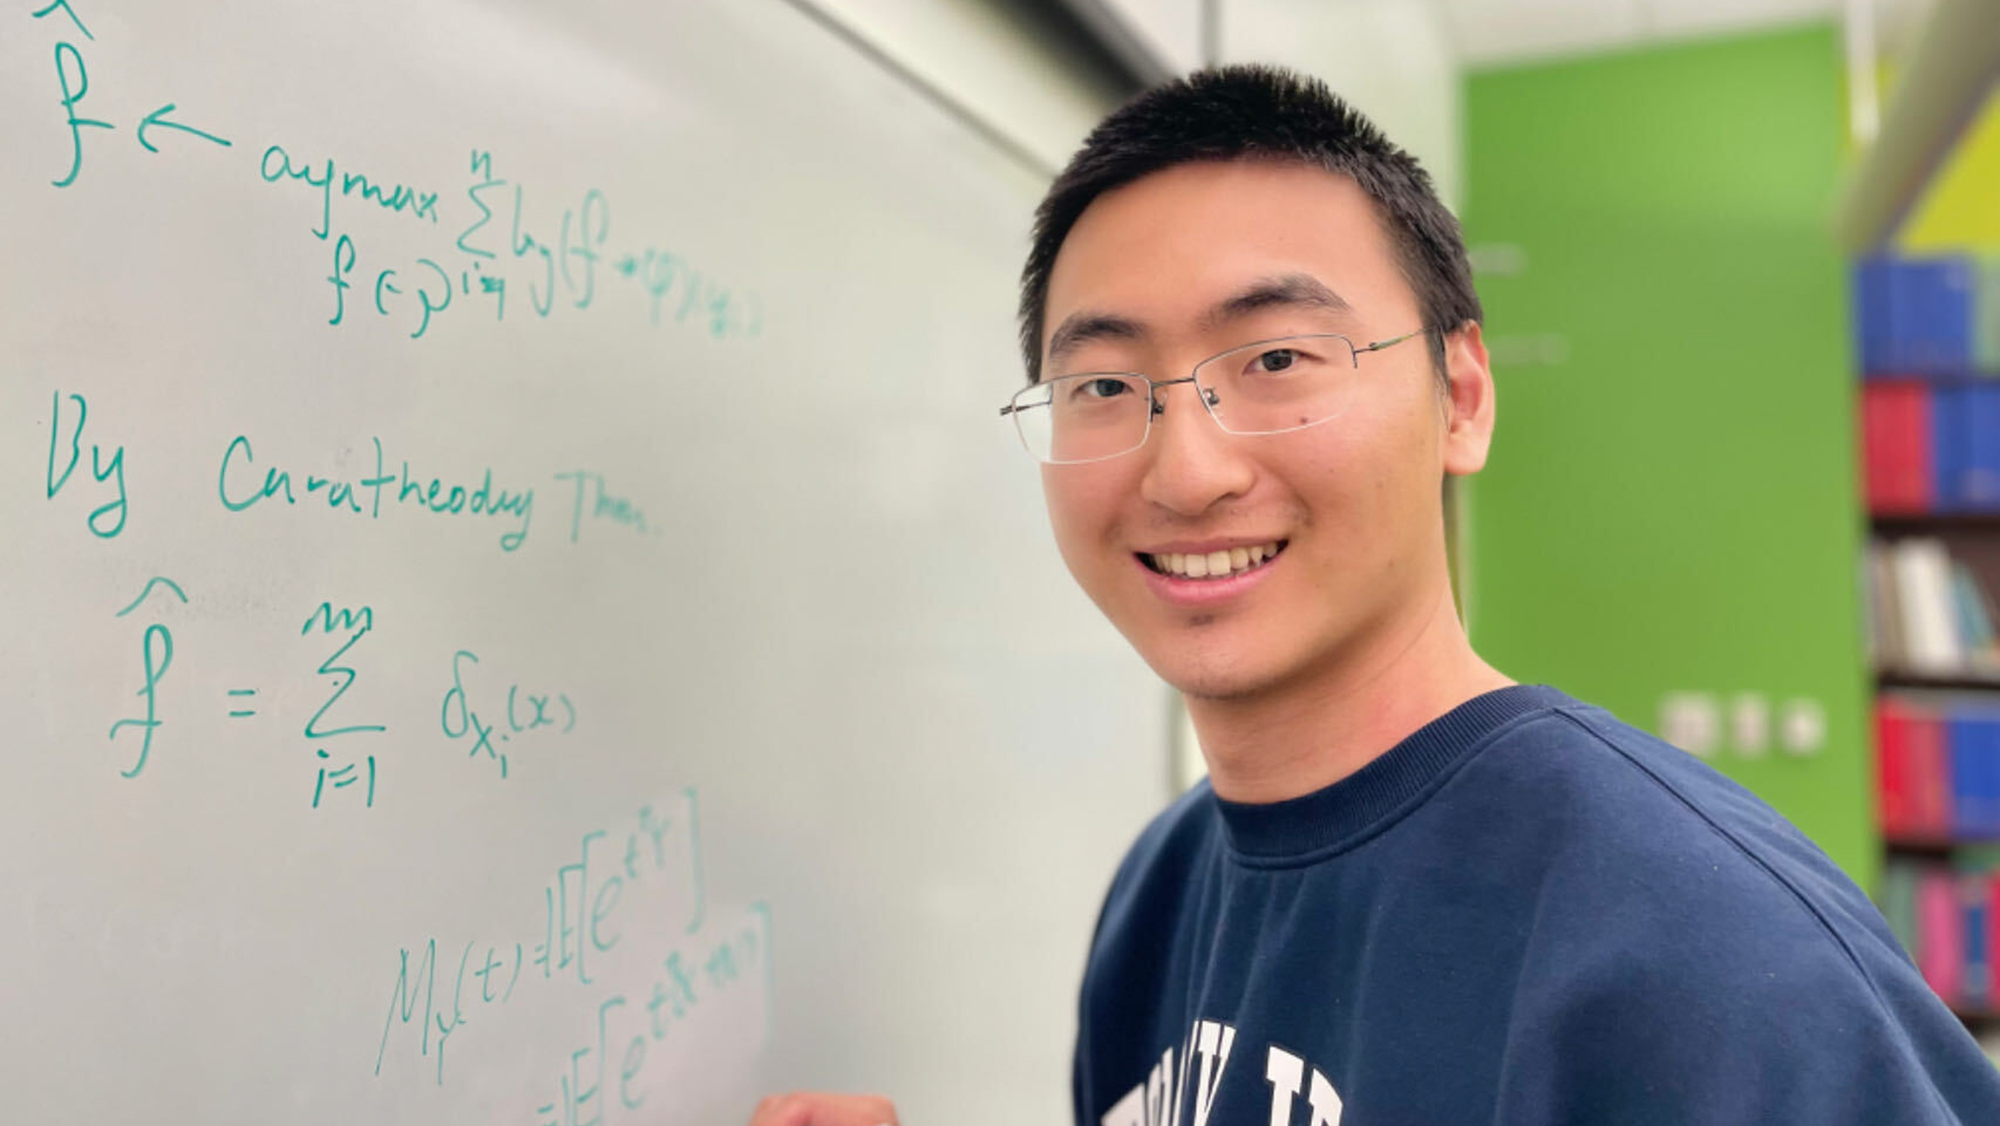 A man in glasses smiling at the camera while writing mathematical equations on a whiteboard in a classroom setting.